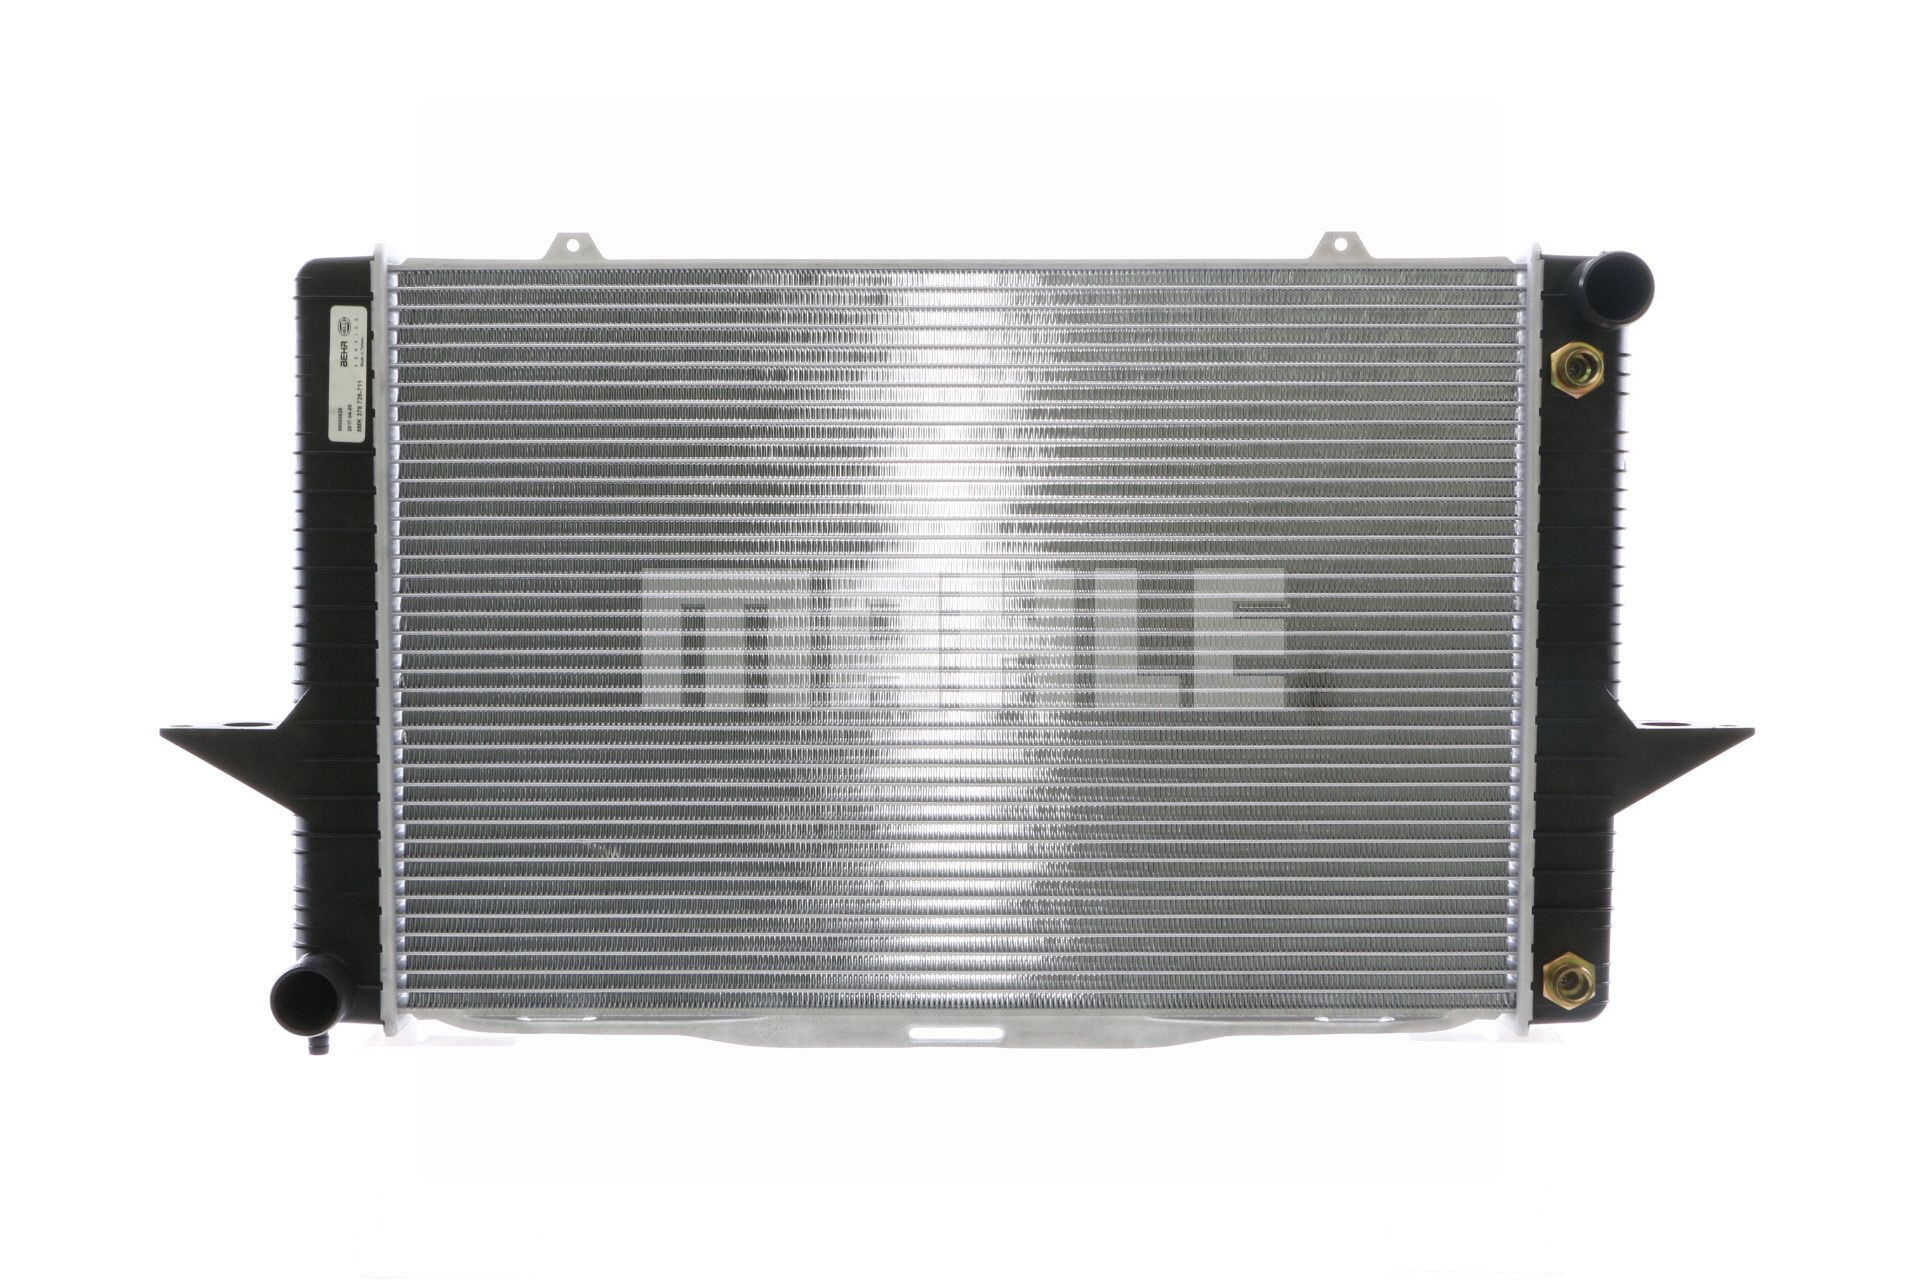 MAHLE ORIGINAL CR 762 000S Engine radiator for vehicles with/without air conditioning, 590 x 388 x 32 mm, Manual Transmission, Brazed cooling fins